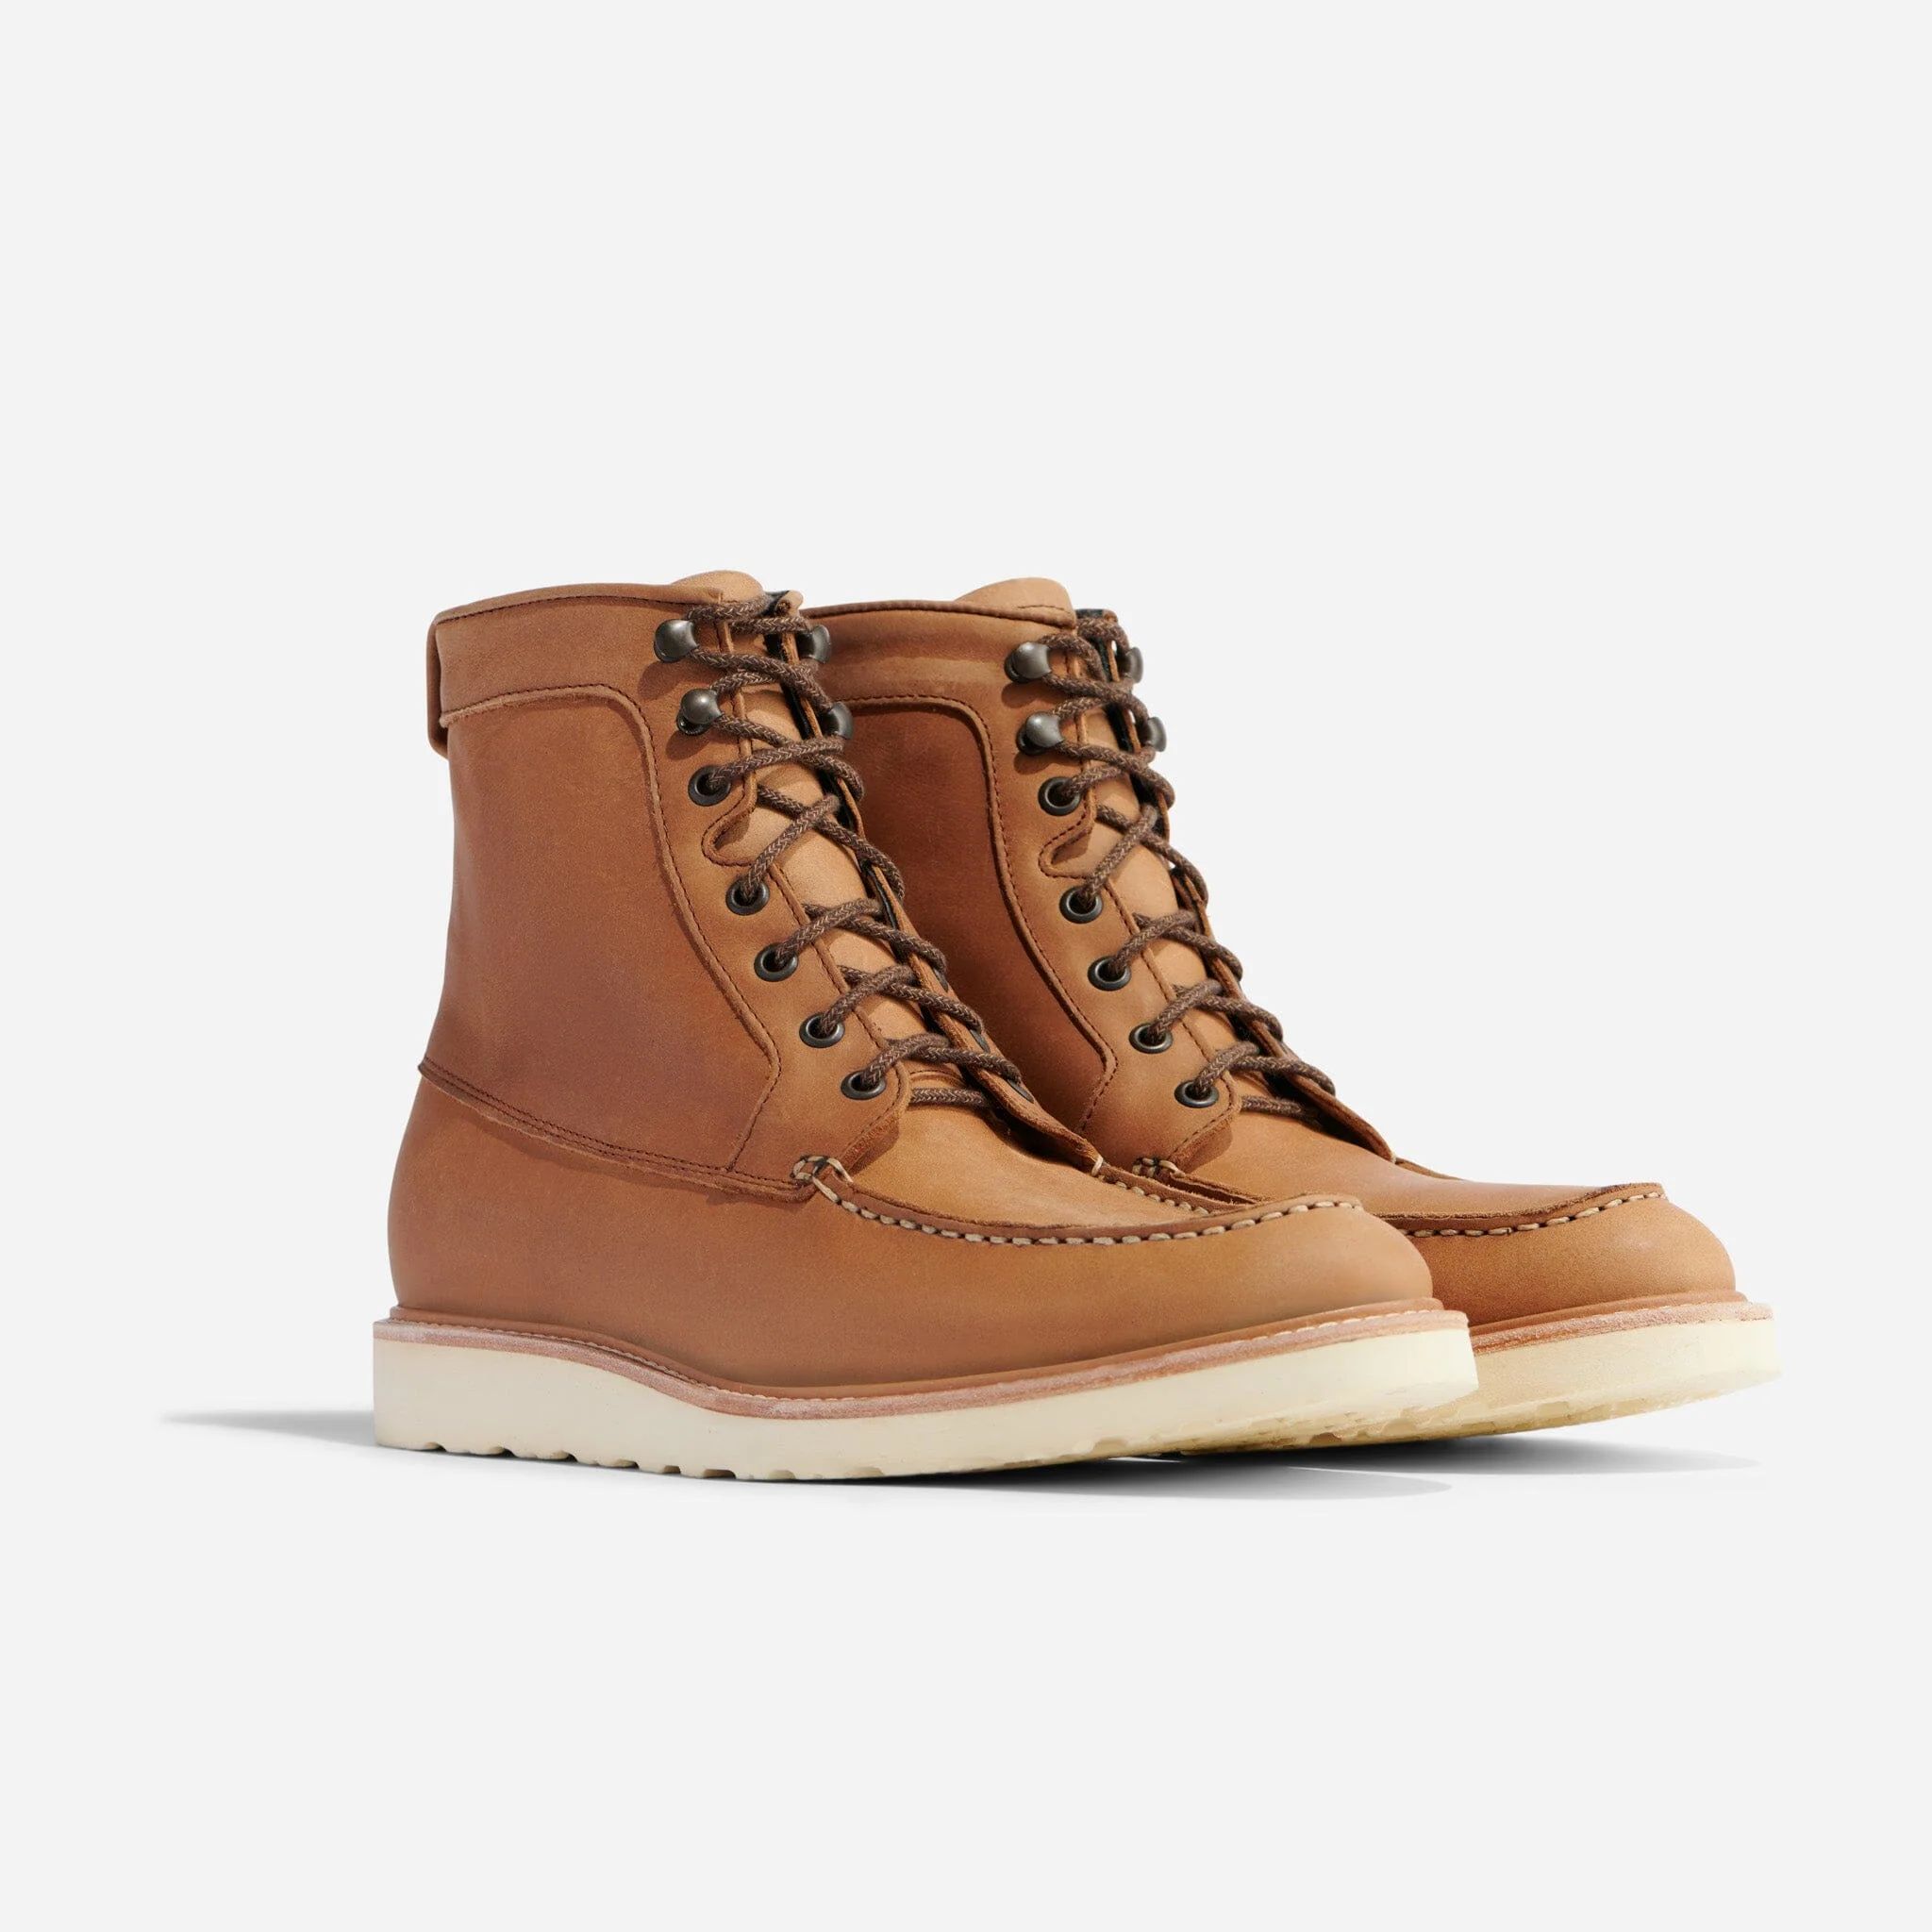 All-Weather Mateo Boot | Nisolo